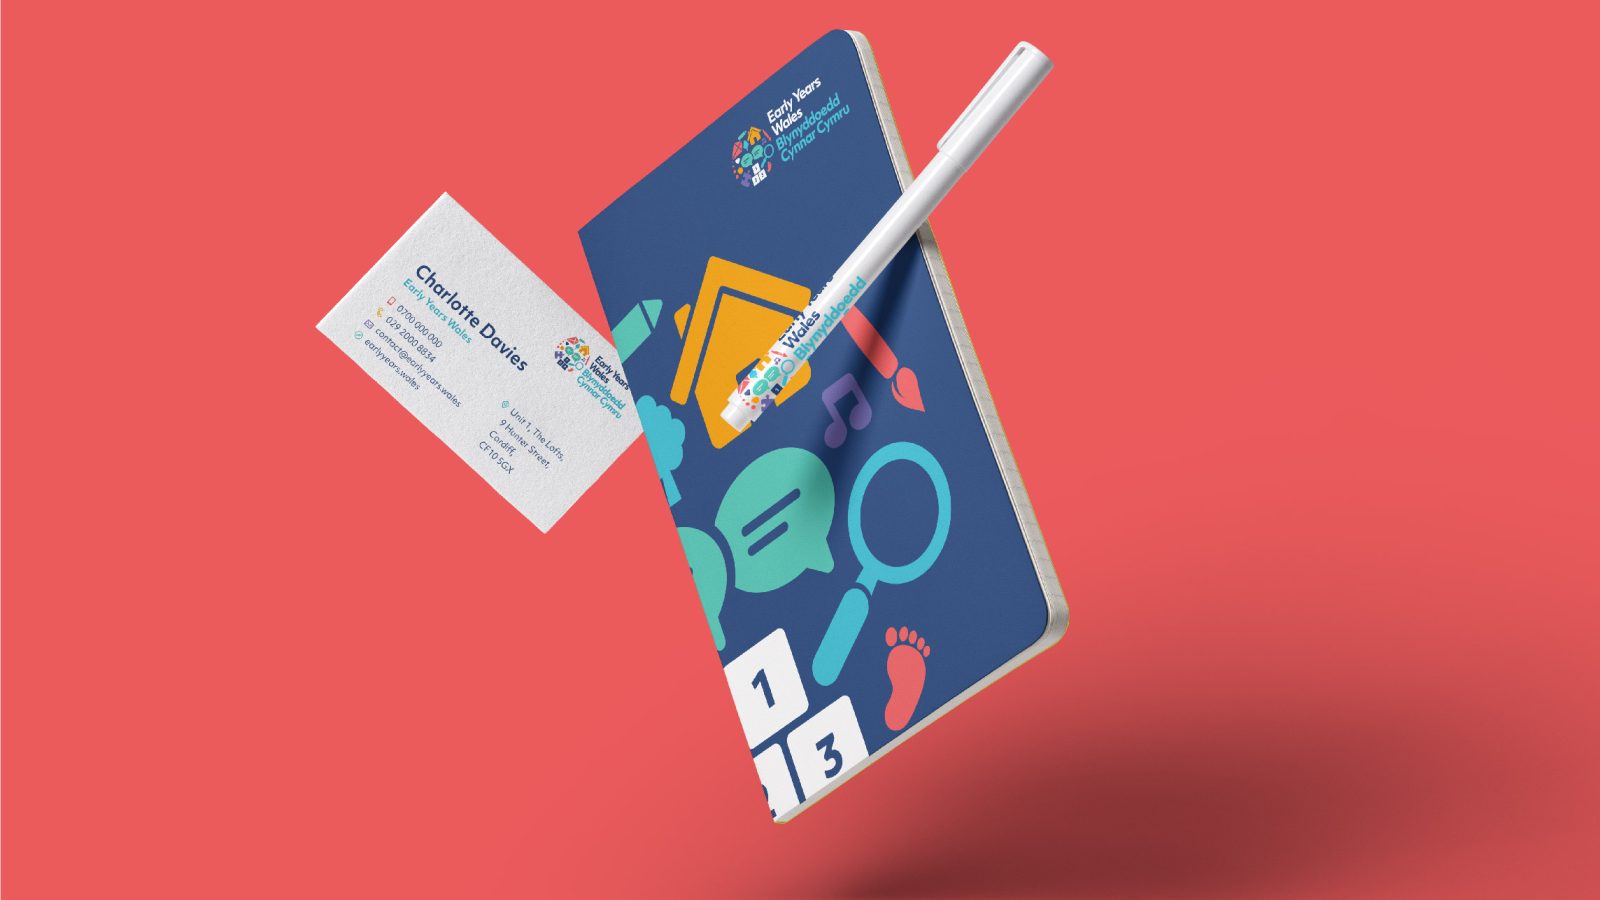 A realistic graphic of a planner, pen, and business card from a Design Agency UK floating against a vivid coral background. The planner displays a vibrant design with icons related to scheduling and tasks.